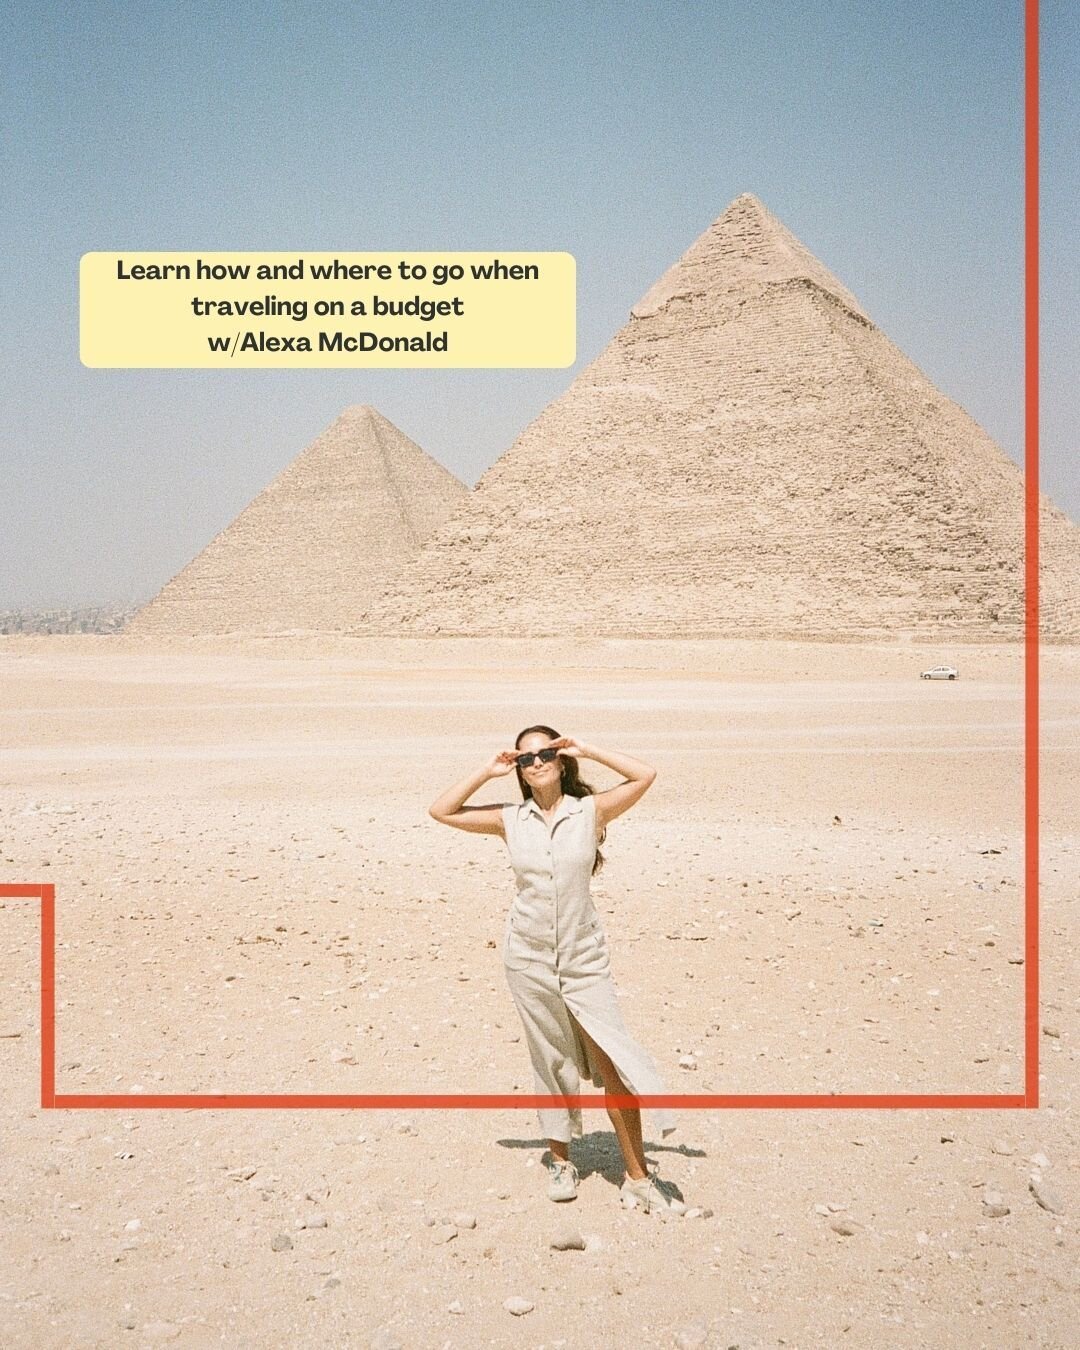 In episode 70 we sit down with Alexa McDonald, a solo traveler dedicated to inspiring and educating others on budget-friendly exploration. Alexa specializes in not only the art of budget travel but also off-the-beaten-path destinations. Through her e